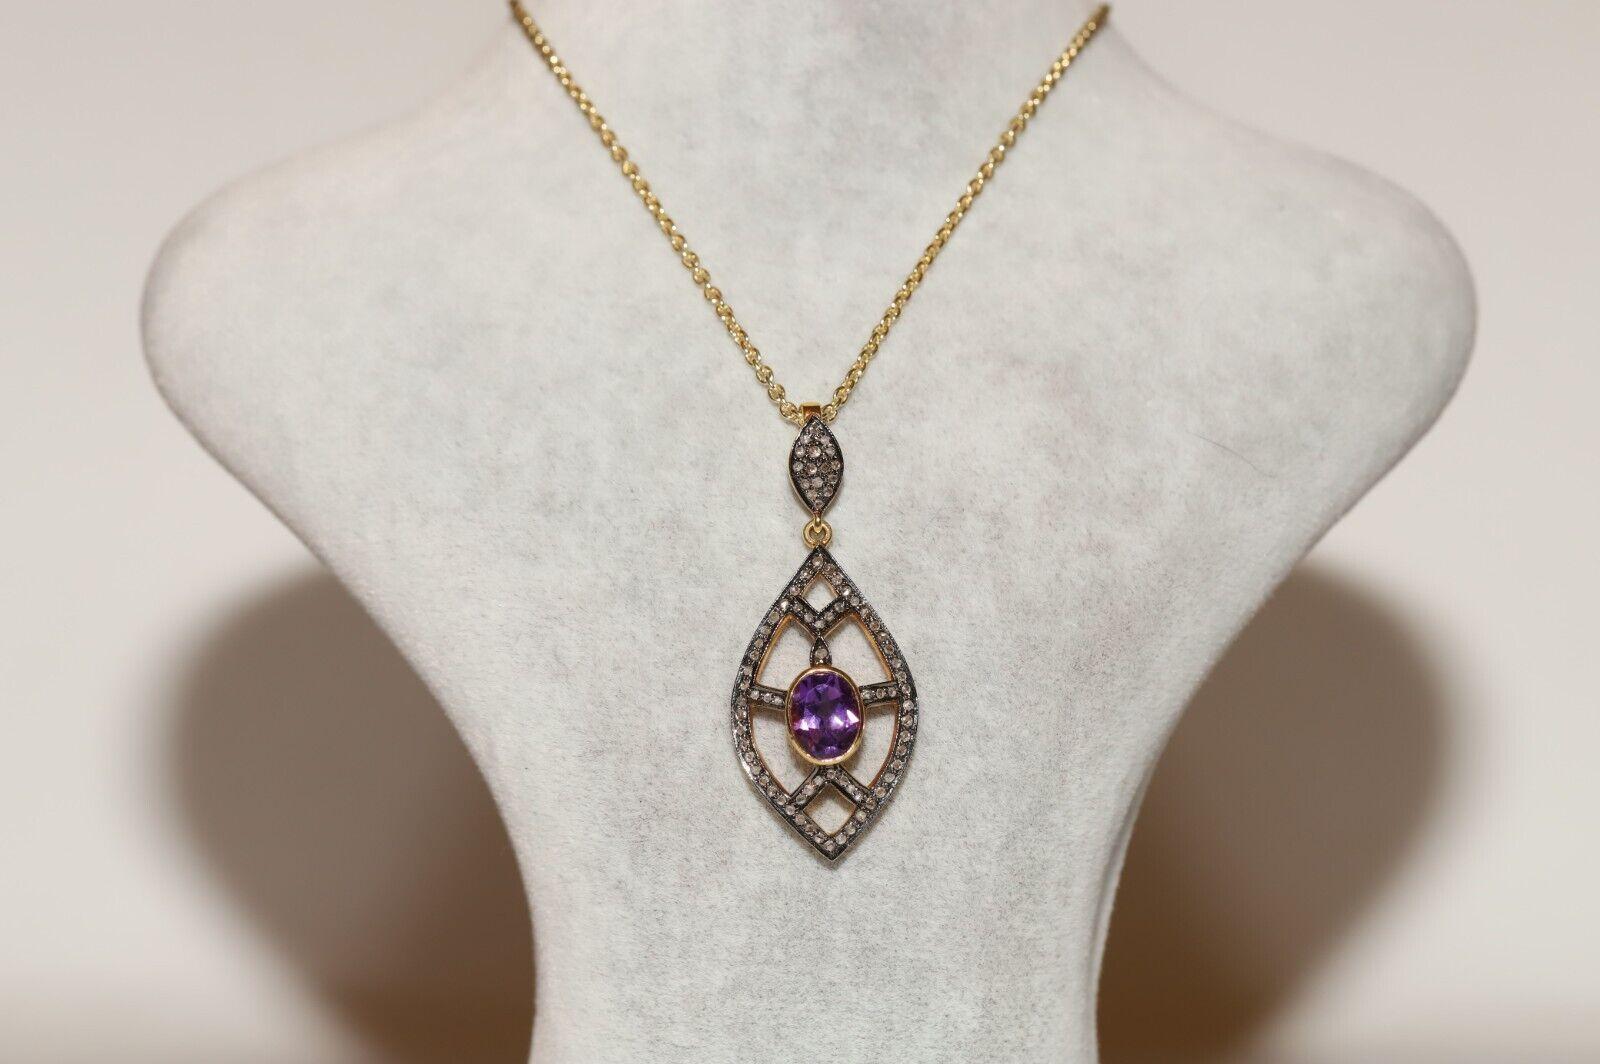 In very good condition.
Total weight is 9.7 grams.
Totally is Rose Cut Diamond is about 0.70 carat.
Totally is Amethyst  about 1.50 carat.
Totally lenght is chain 45 cm.
Please contact for any questions.
